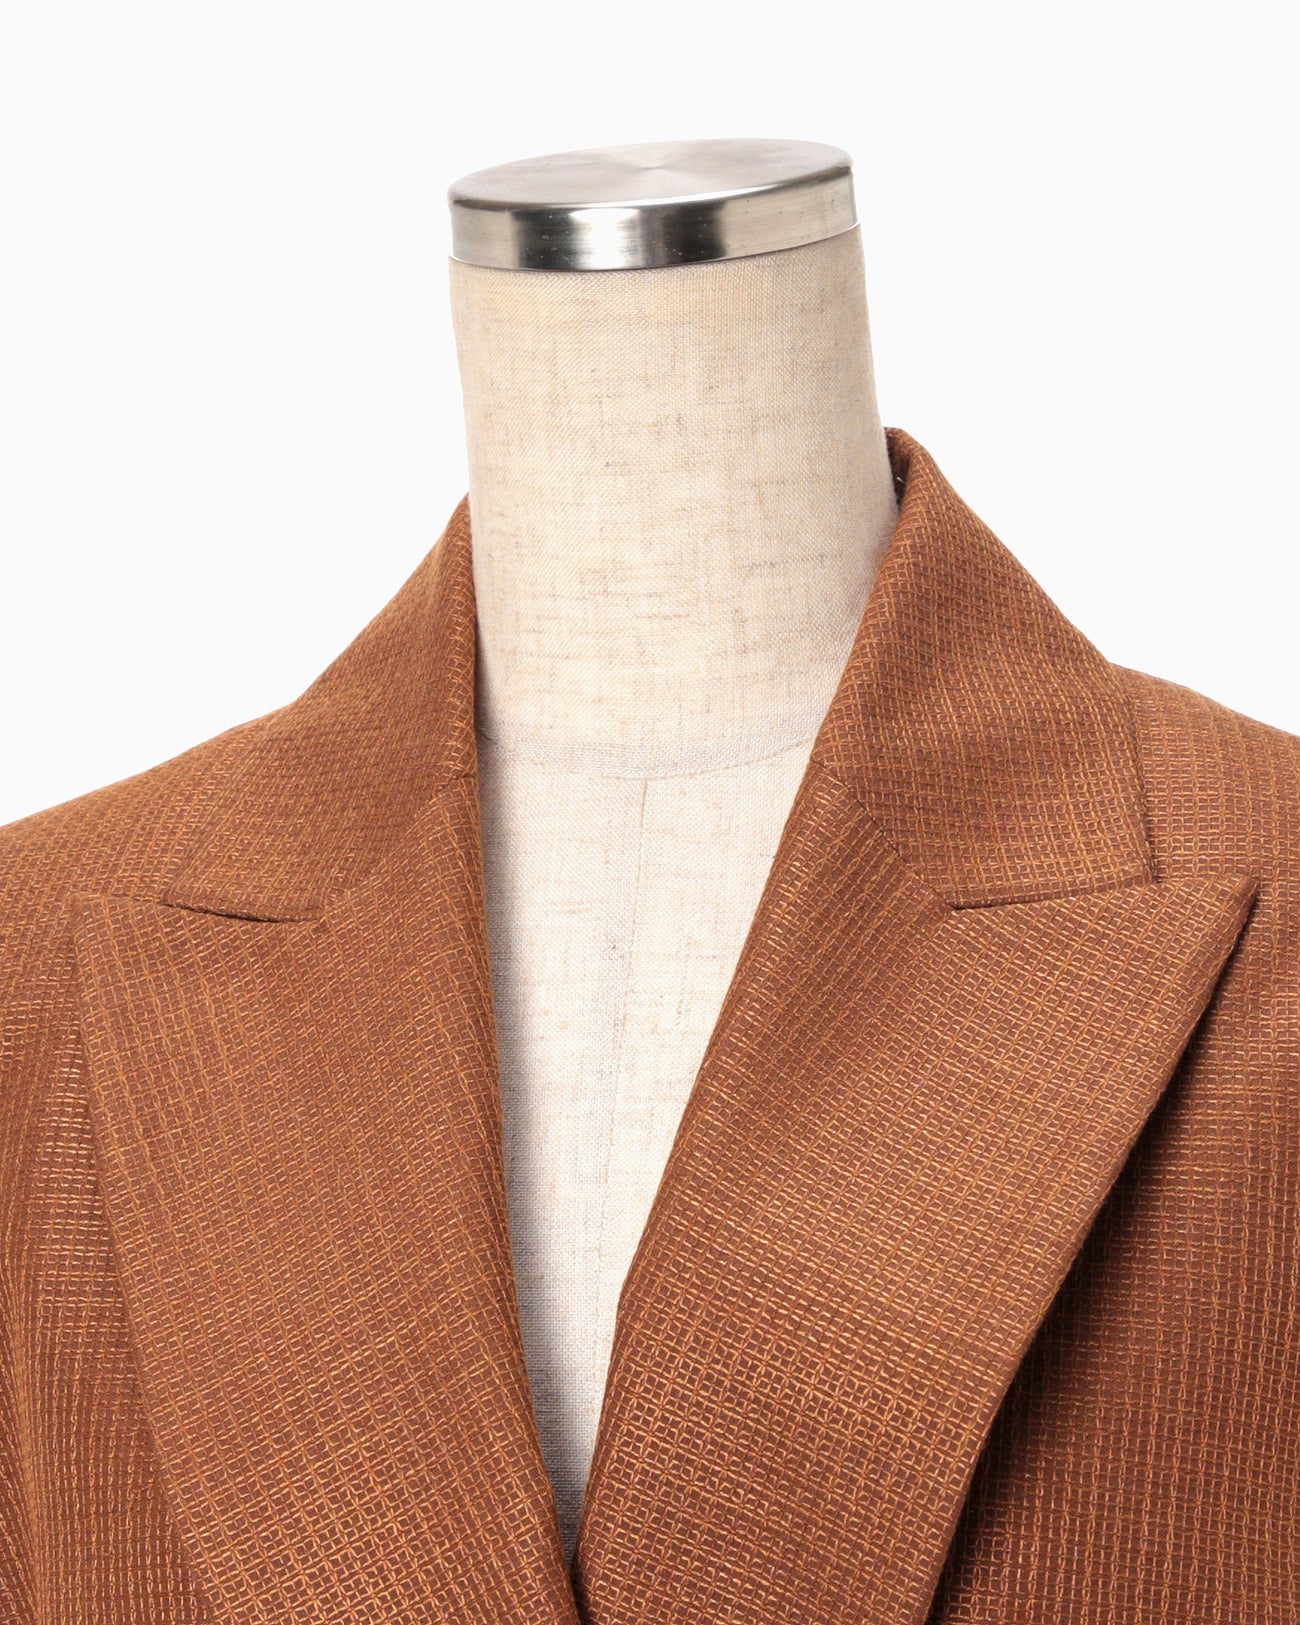 Geometric Silk Cotton Jacquard Double Beasted Jacket - brown